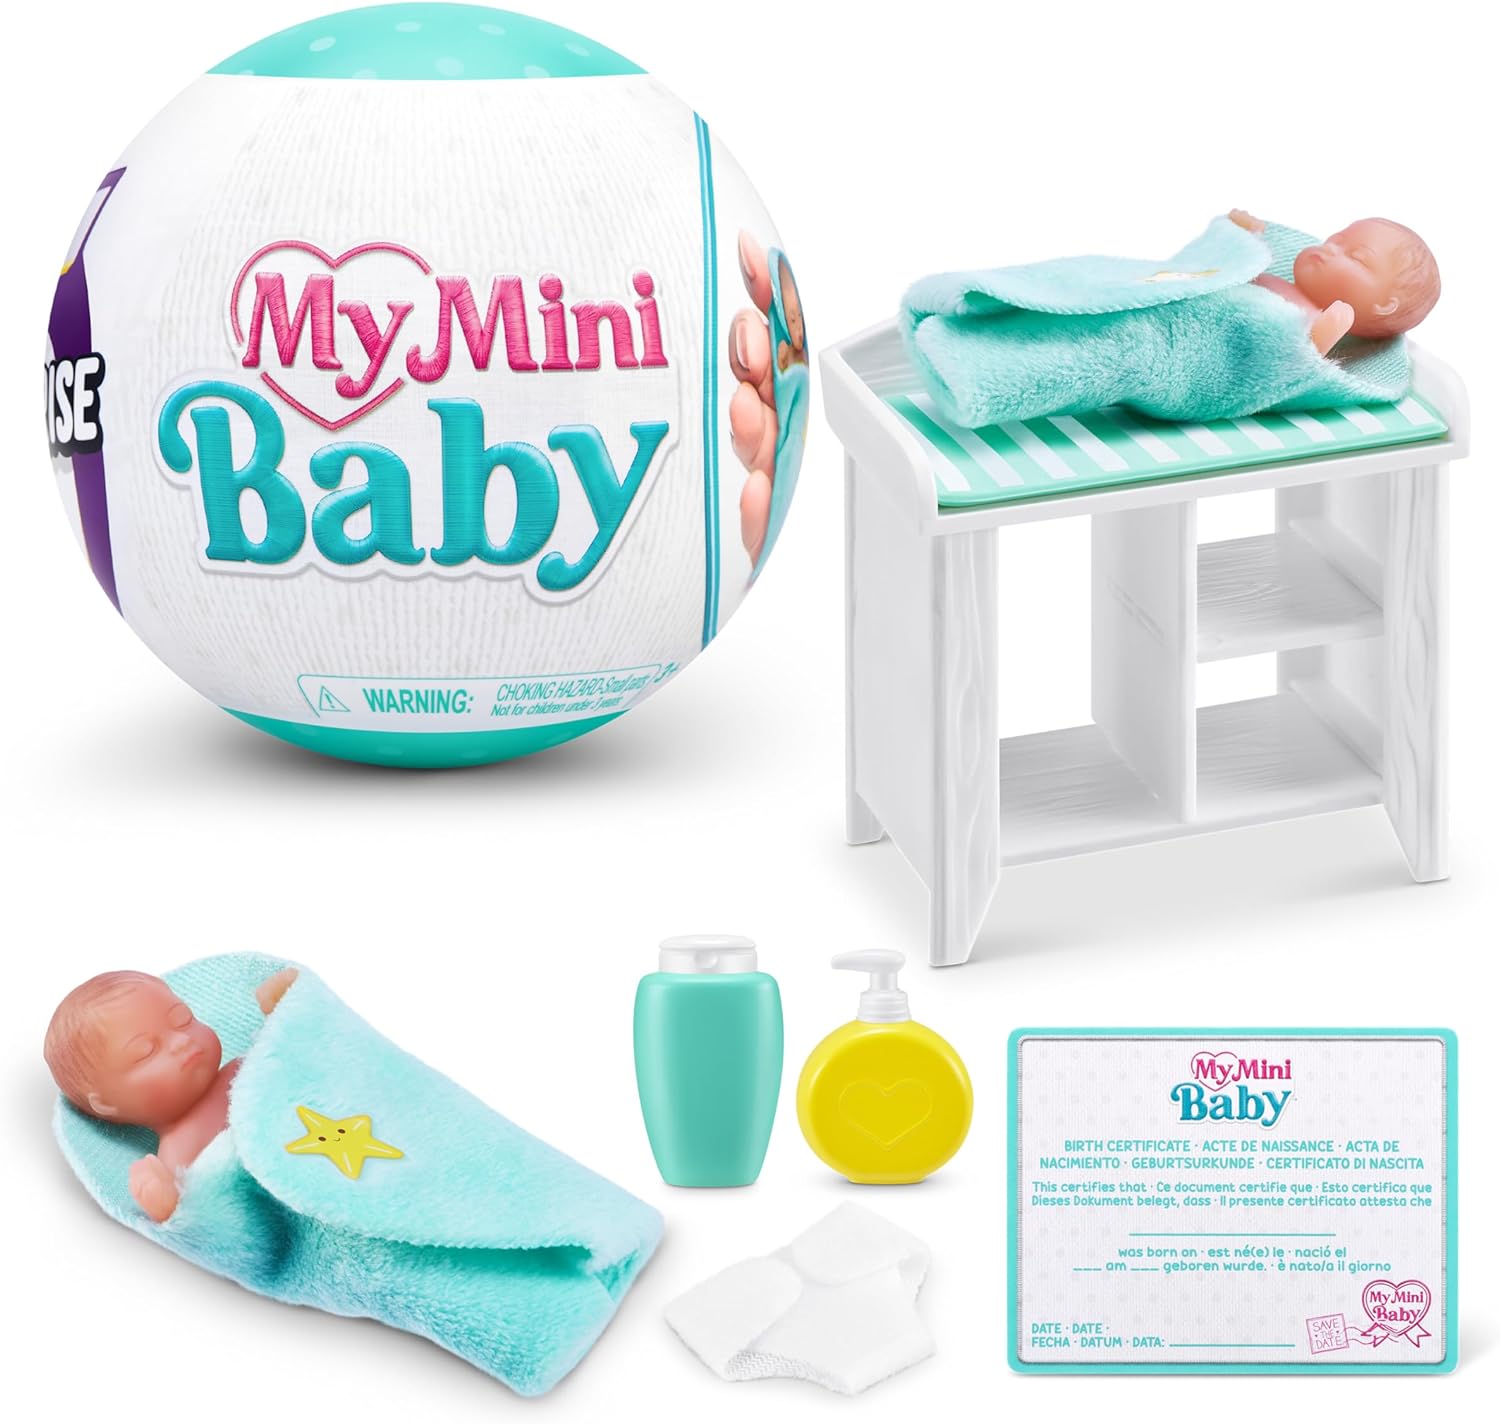 Would you buy this? Zuru 5 Surprise My Mini Baby - Assorted